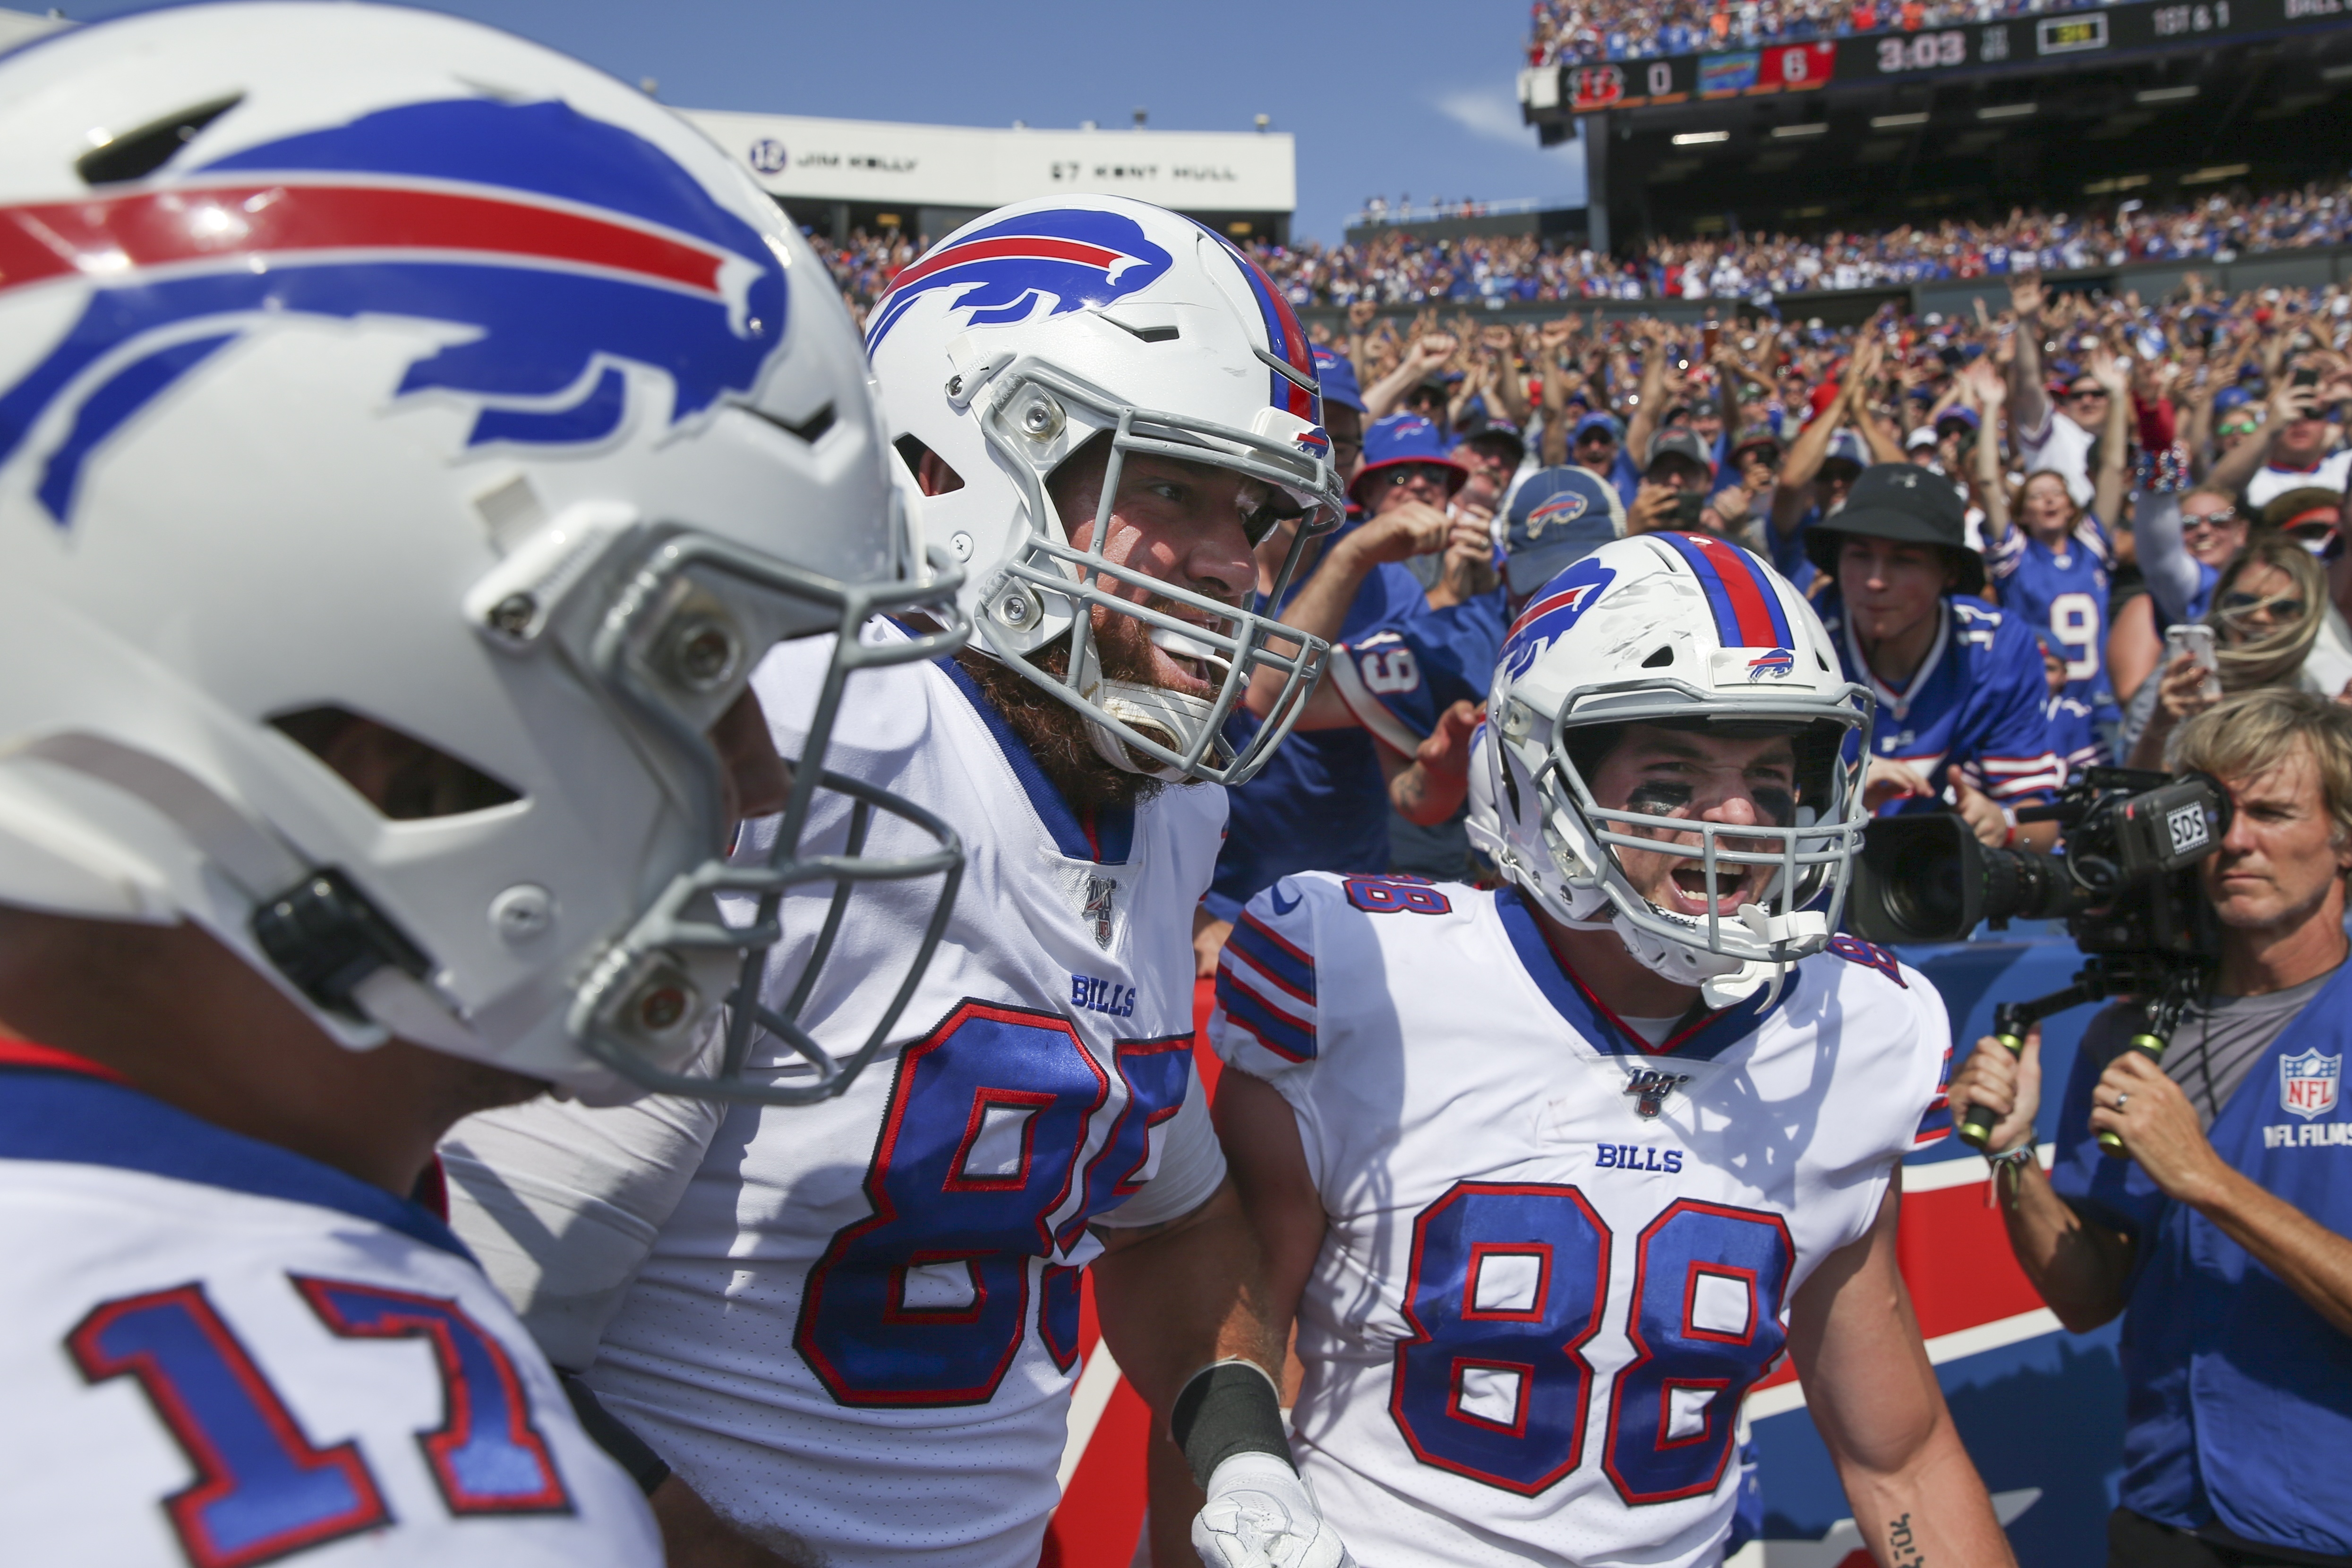 Bills stay unbeaten by rallying back to beat Bengals 21-17